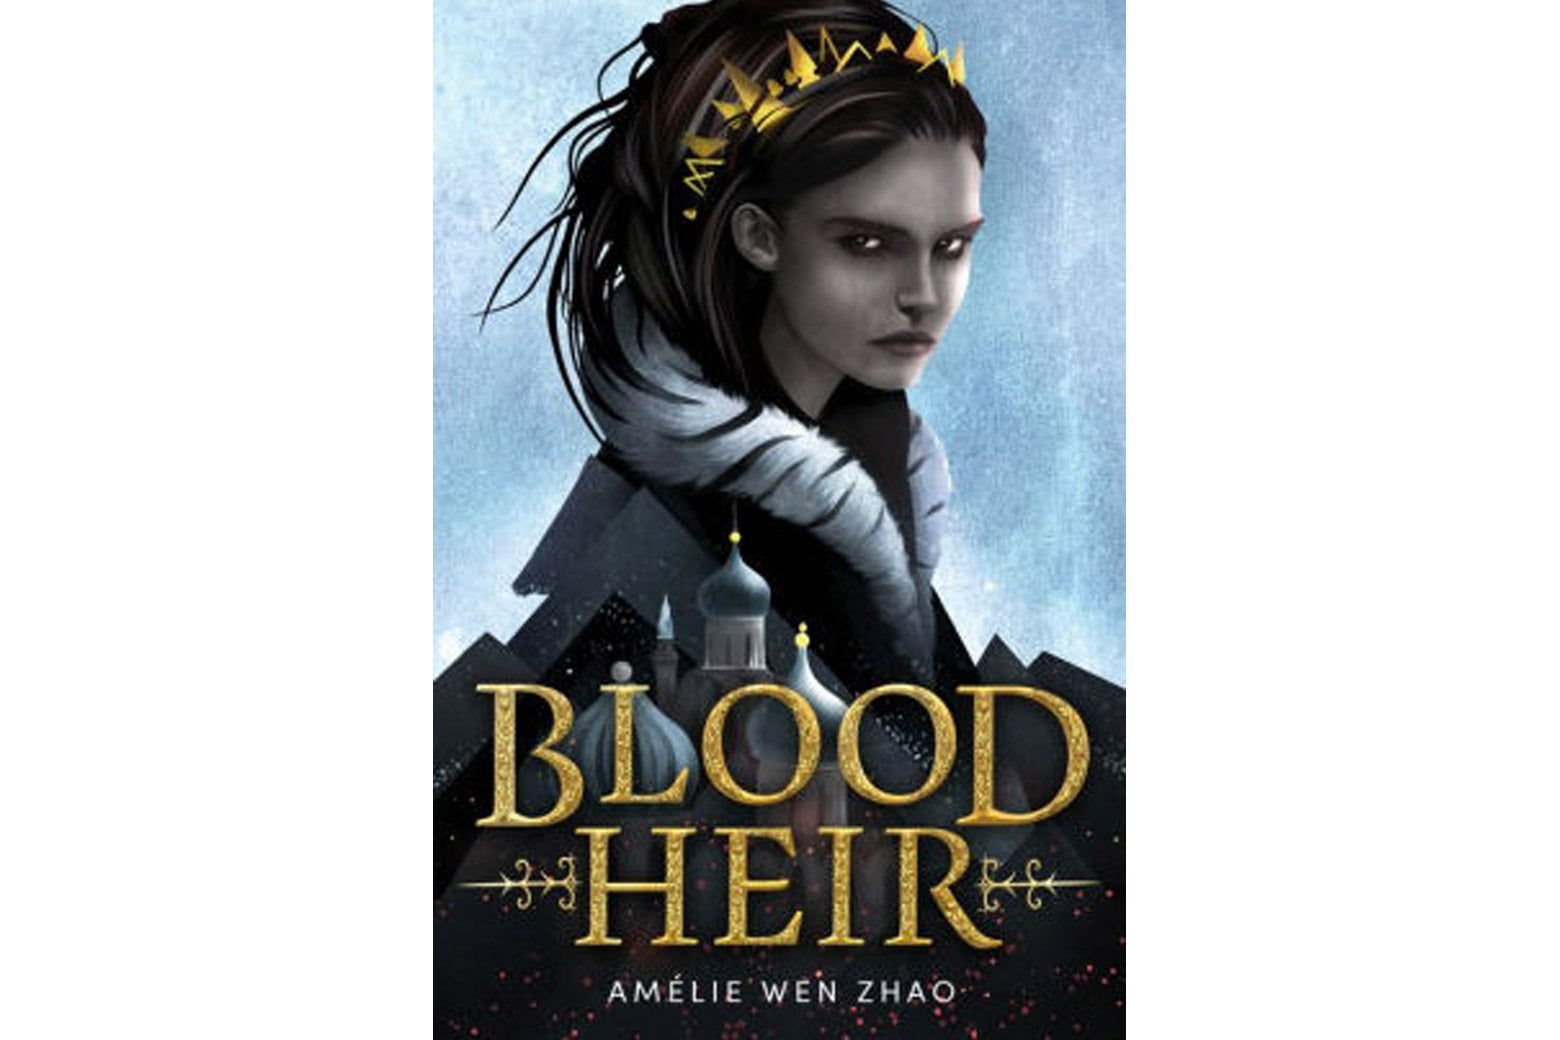 The cover of the book, Blood Heir, featuring an illustration of a dark-haired, light-skinned woman in a crown.